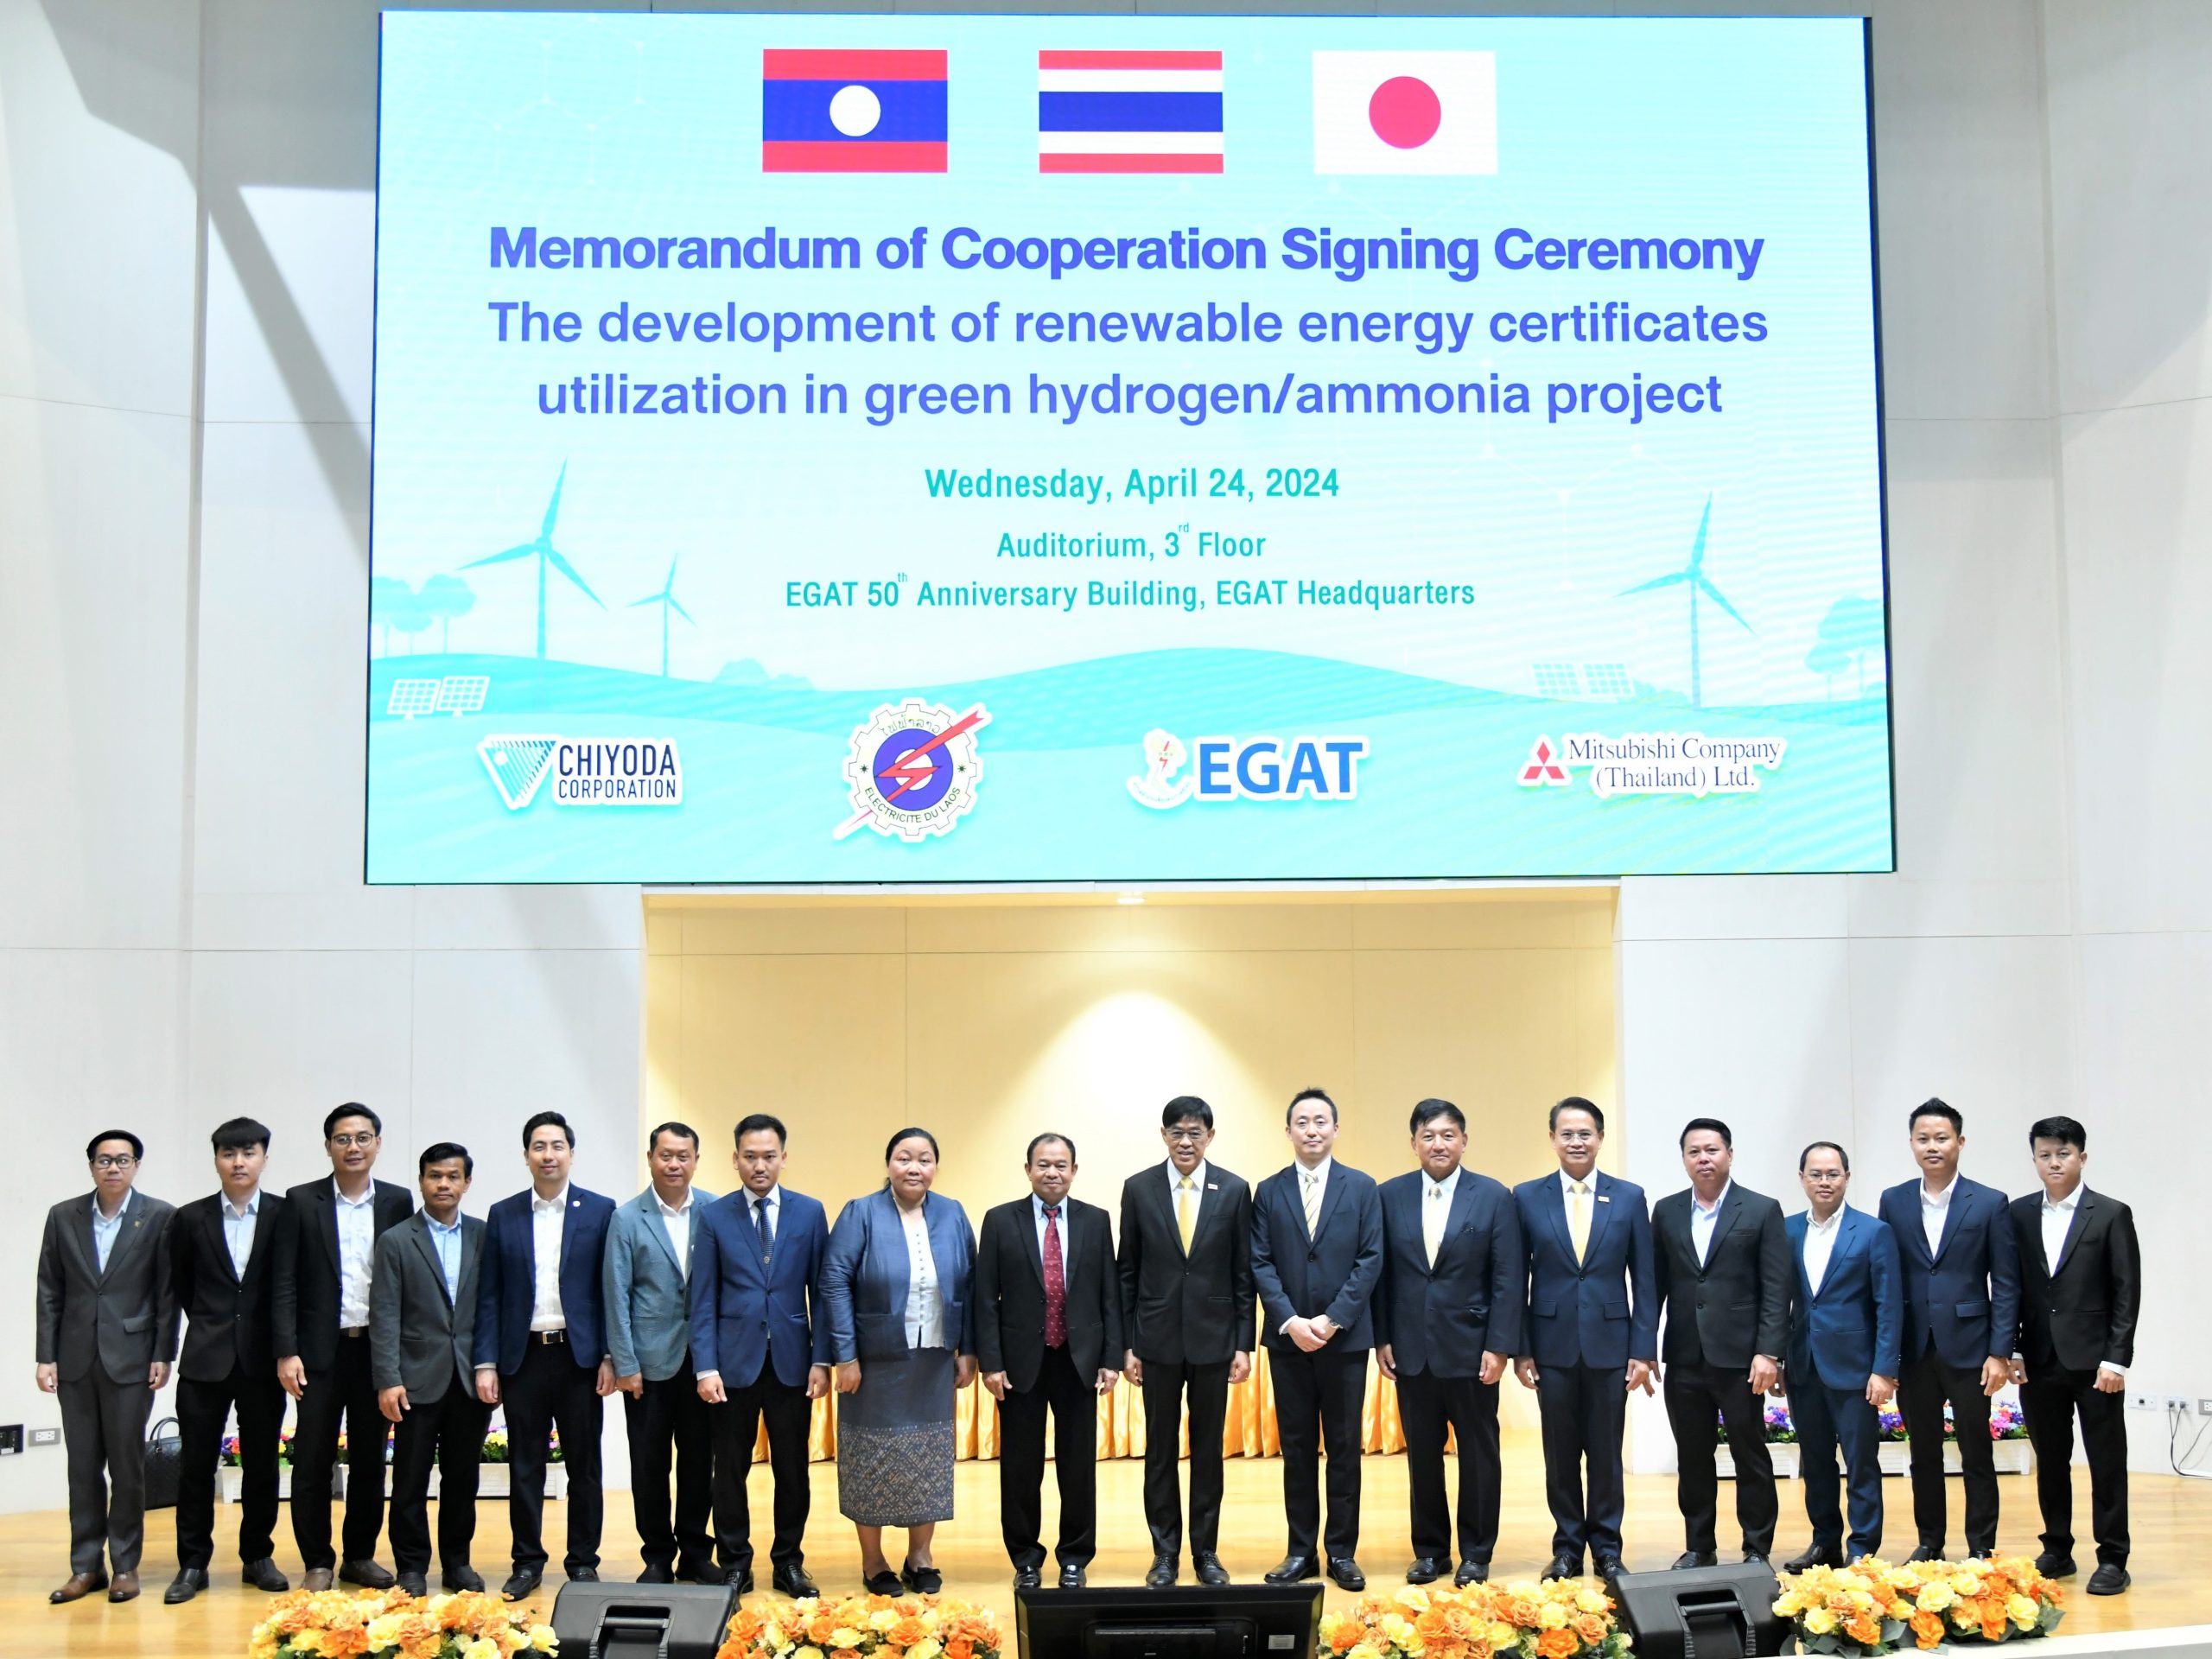 EGAT, EDL, Chiyoda, and Mitsubishi join hands to advance green hydrogen and ammonia